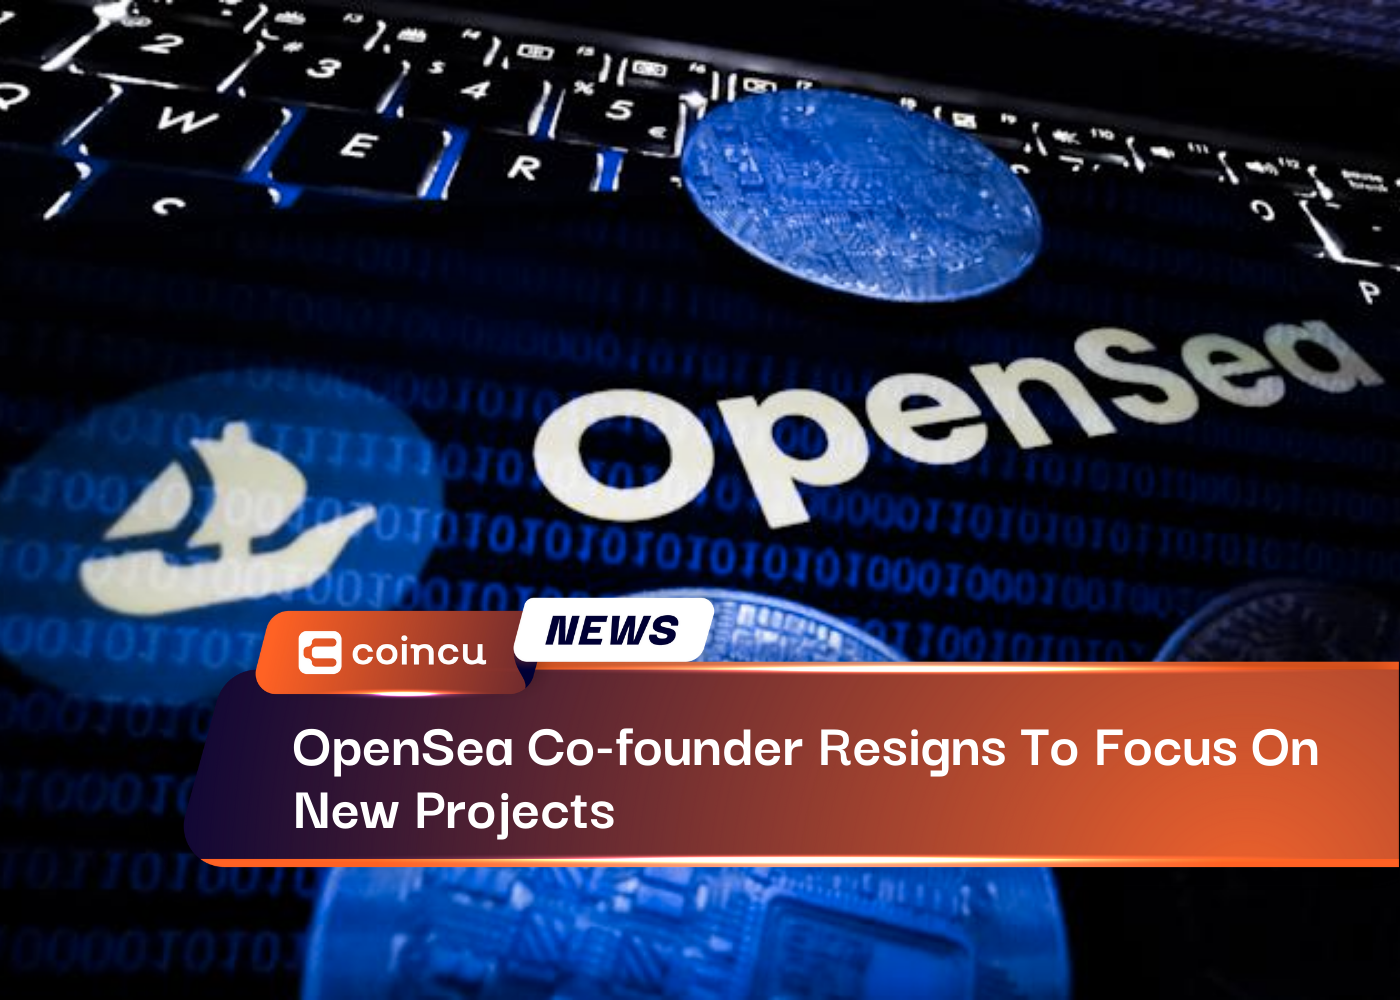 OpenSea Co-founder Resigns To Focus On New Projects